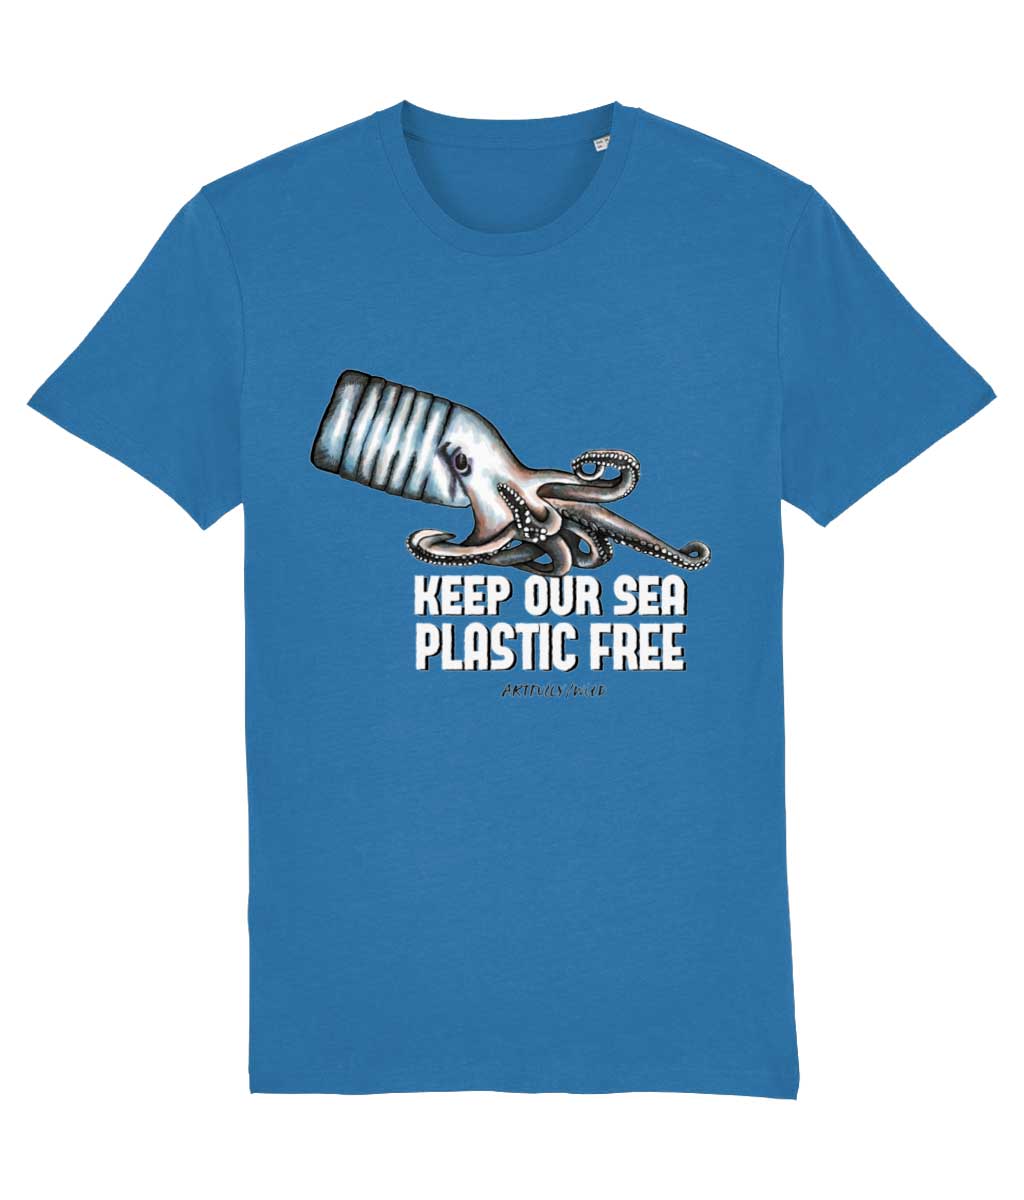 'OCTOPUS BOTTLE – KEEP OUR SEA PLASTIC FREE' Print on Royal Blue Sustainable T-Shirt. Unisex/Women/Men. Certified Organic Clothing. Original Illustration by Artfully/Wild. Printed in the UK.